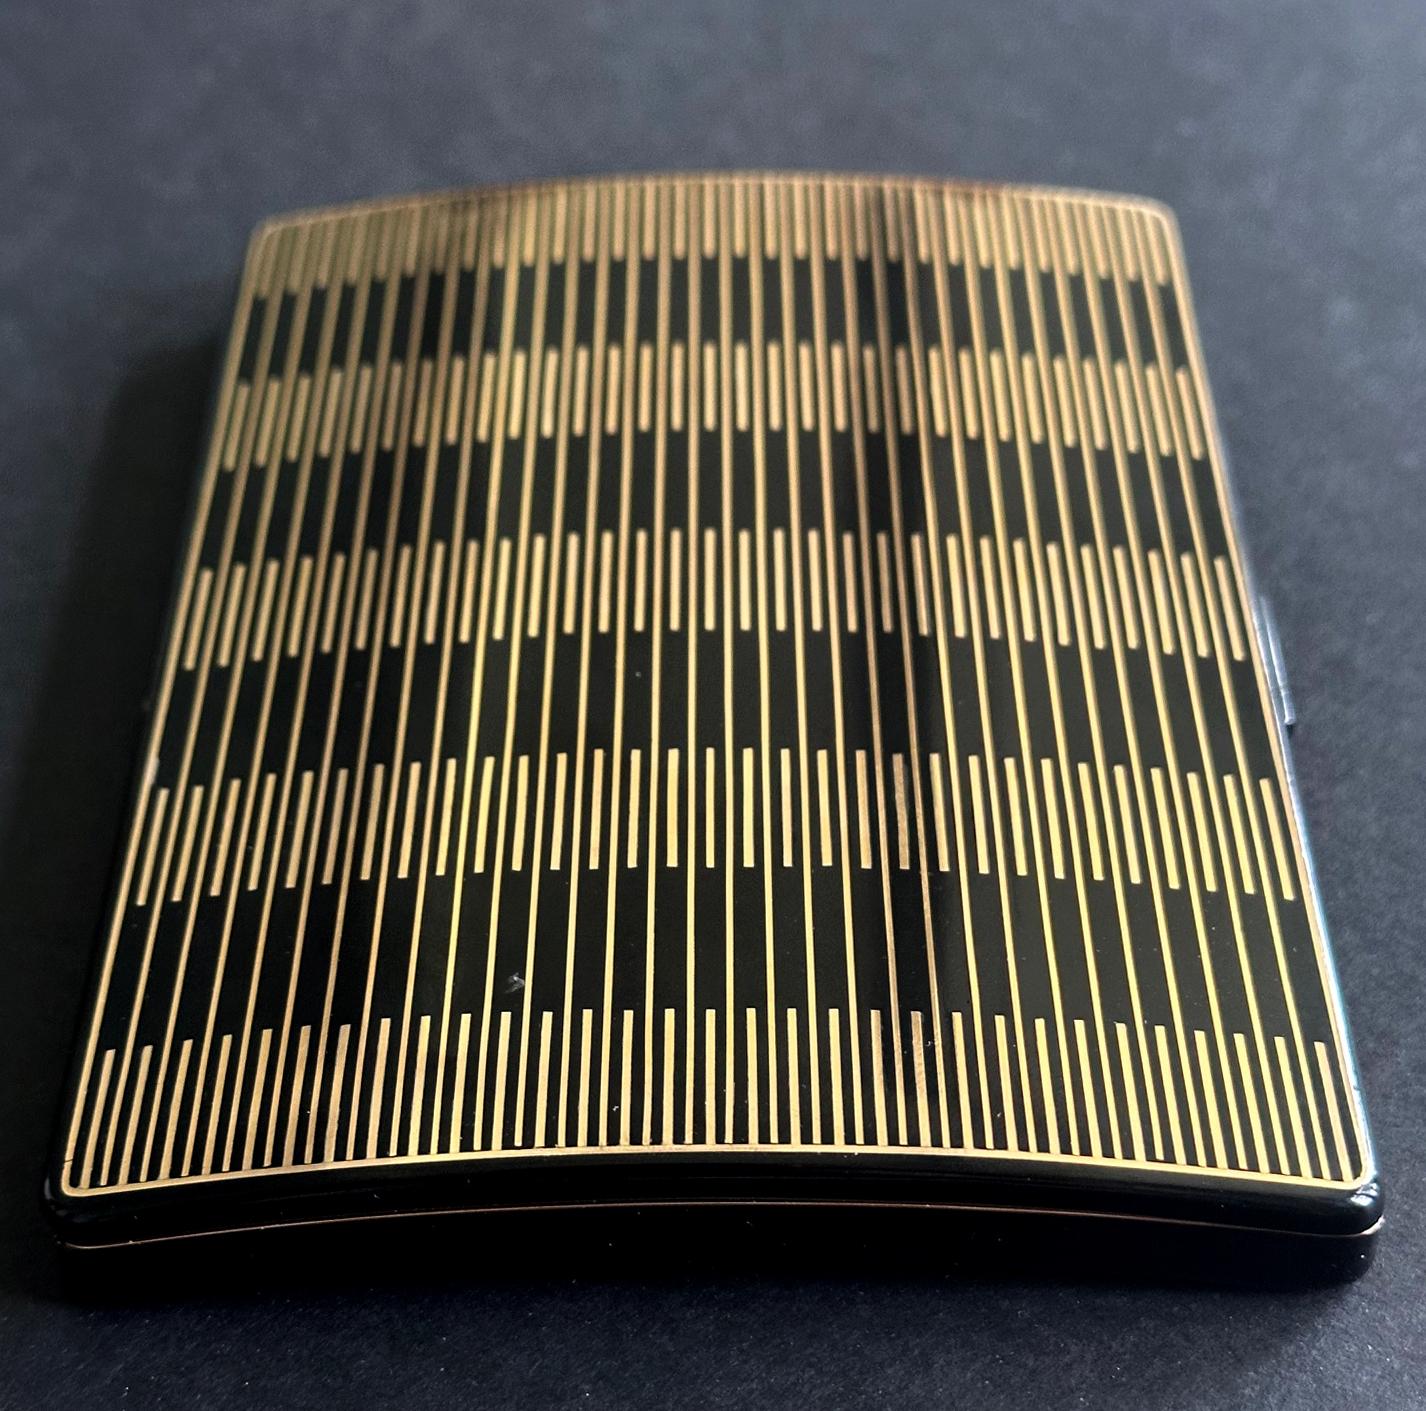 Mid-20th Century French Art Deco Enamel and Gilt Box by Van Cleef & Arpels For Sale